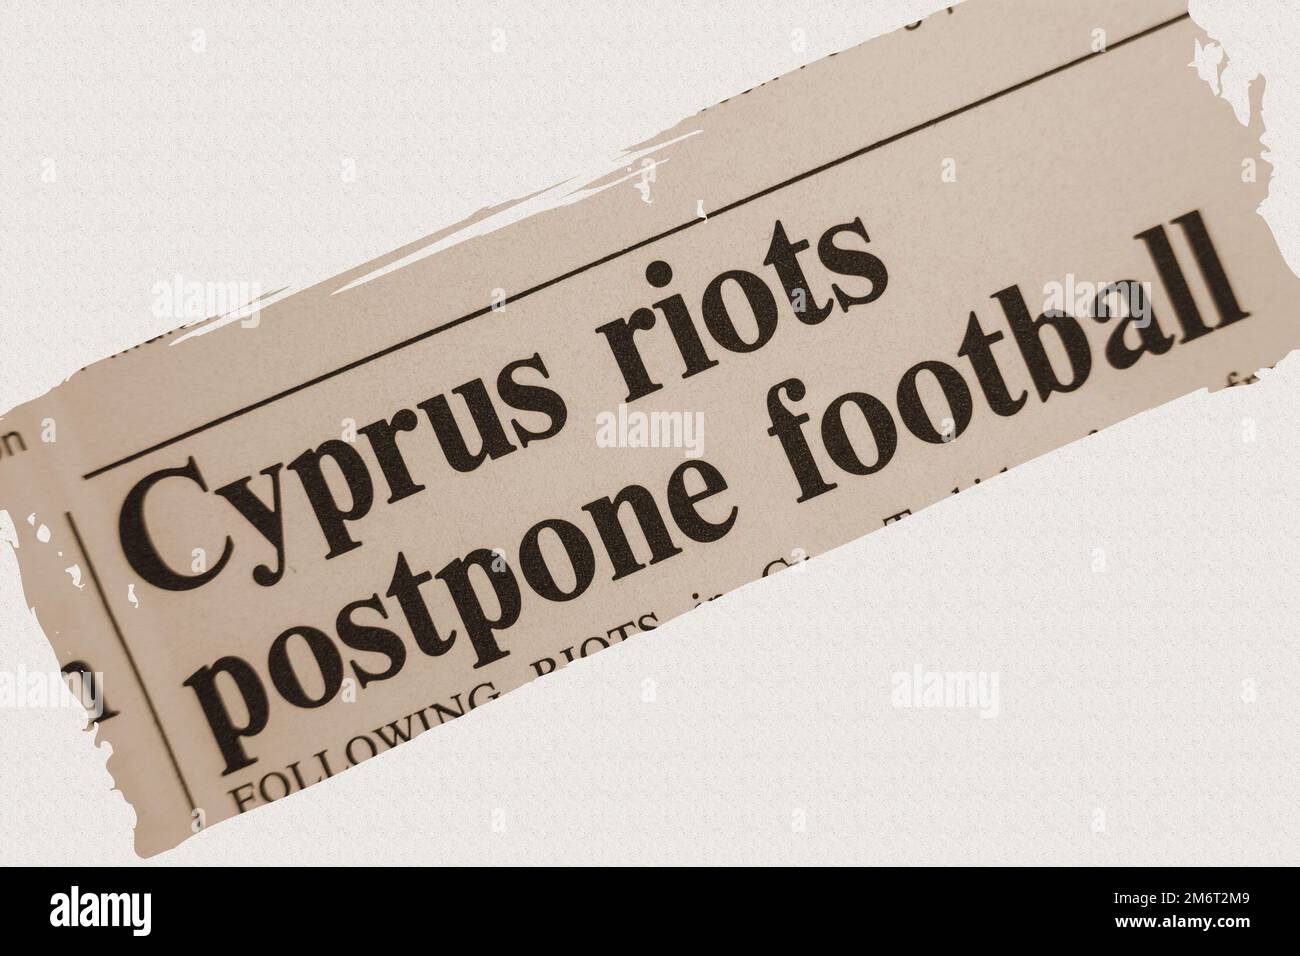 news story from 1975 newspaper headline article title - Cyprus riots postpone football - overlay sepia Stock Photo